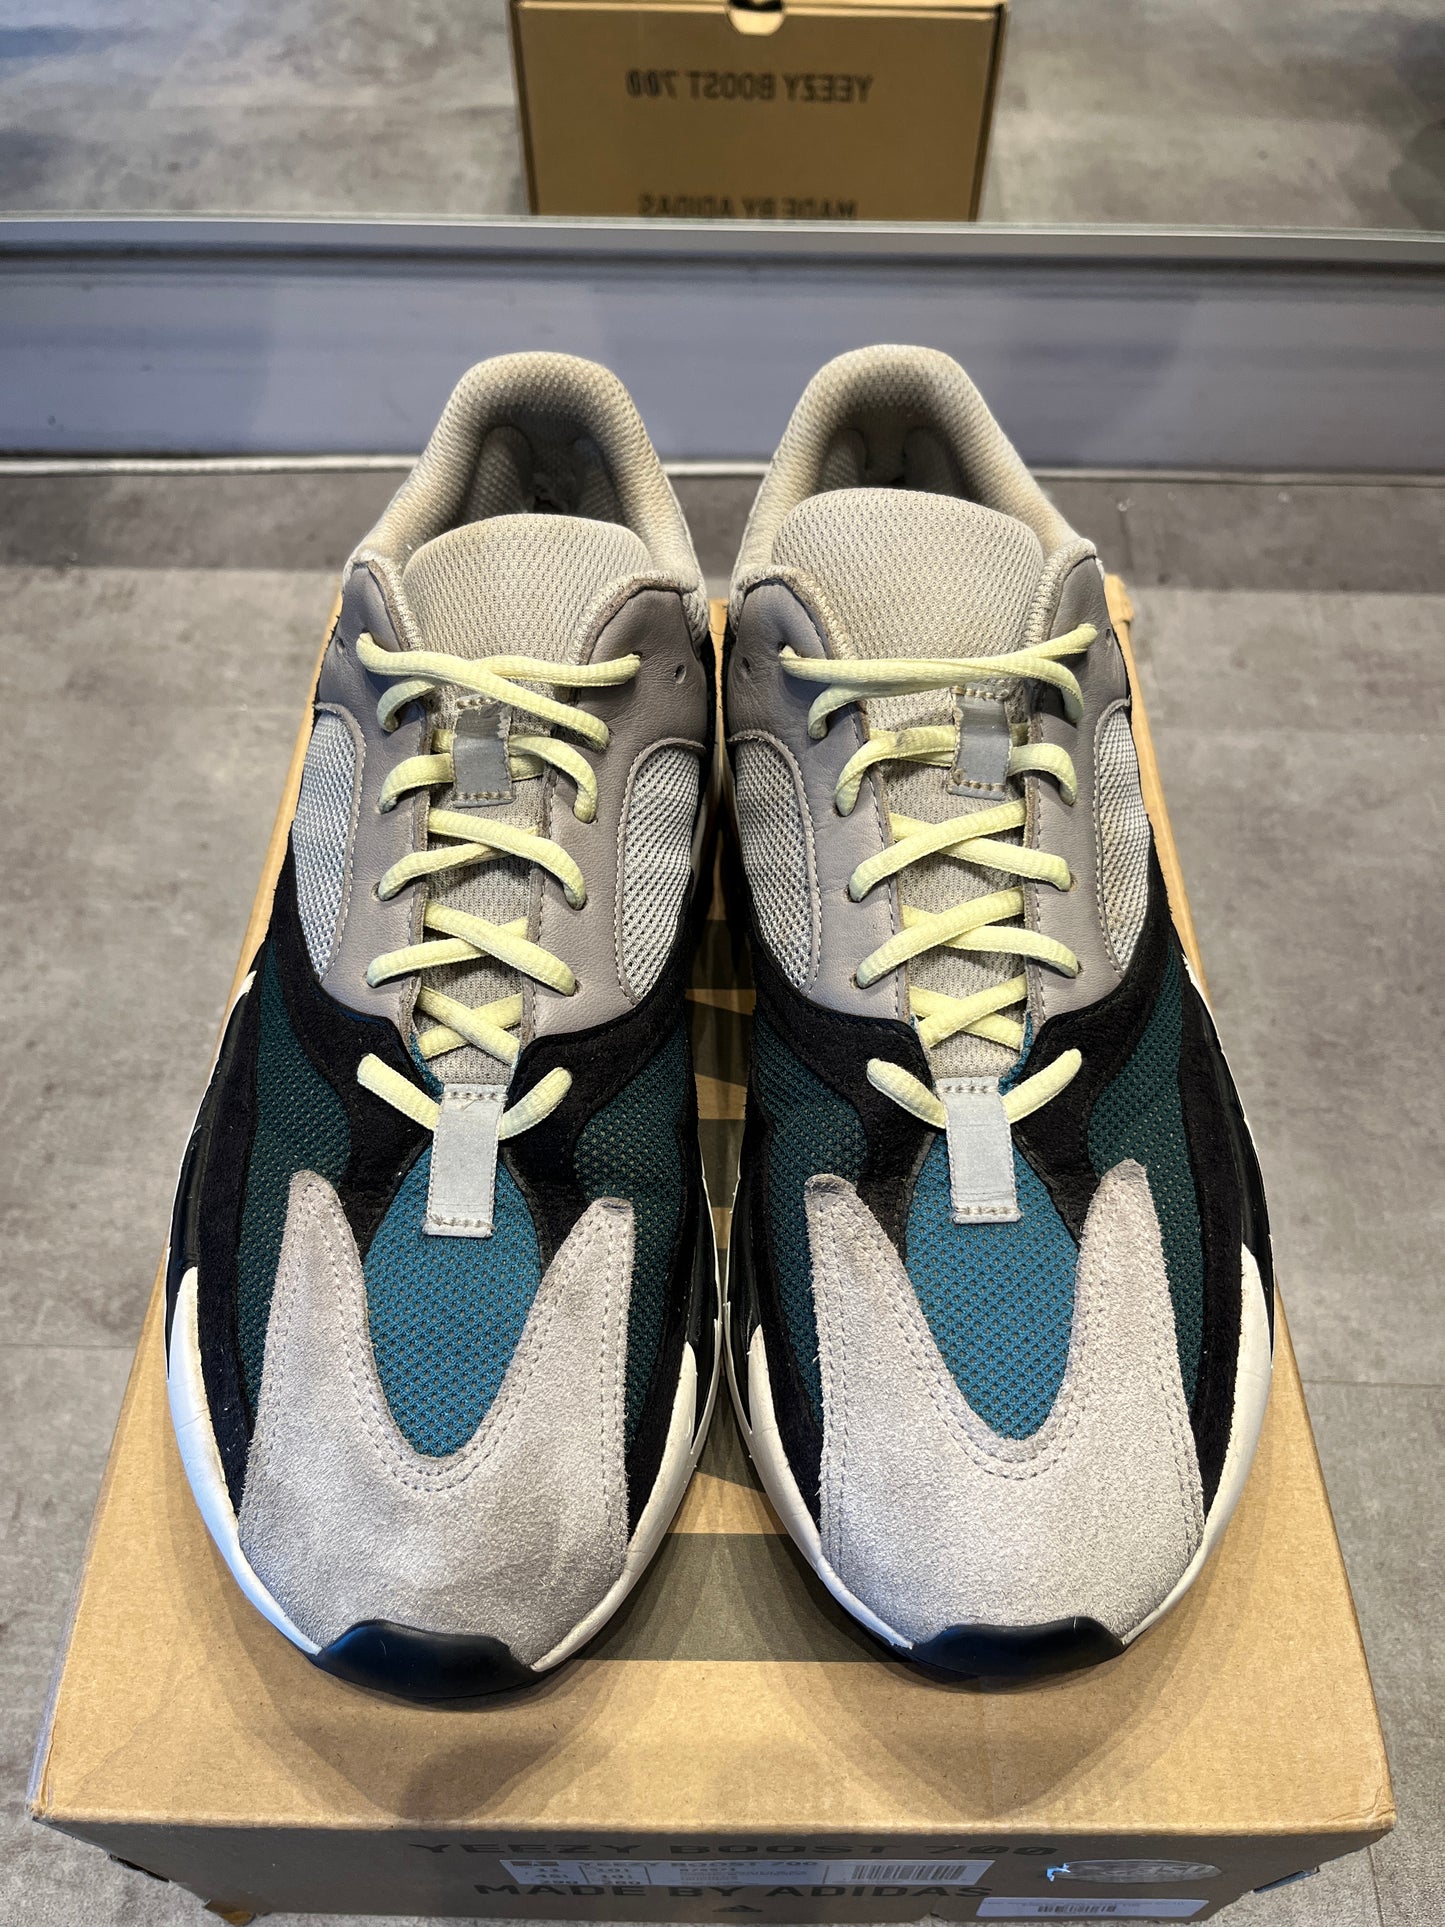 Adidas Yeezy Boost 700 Wave Runner (Preowned Size 11)